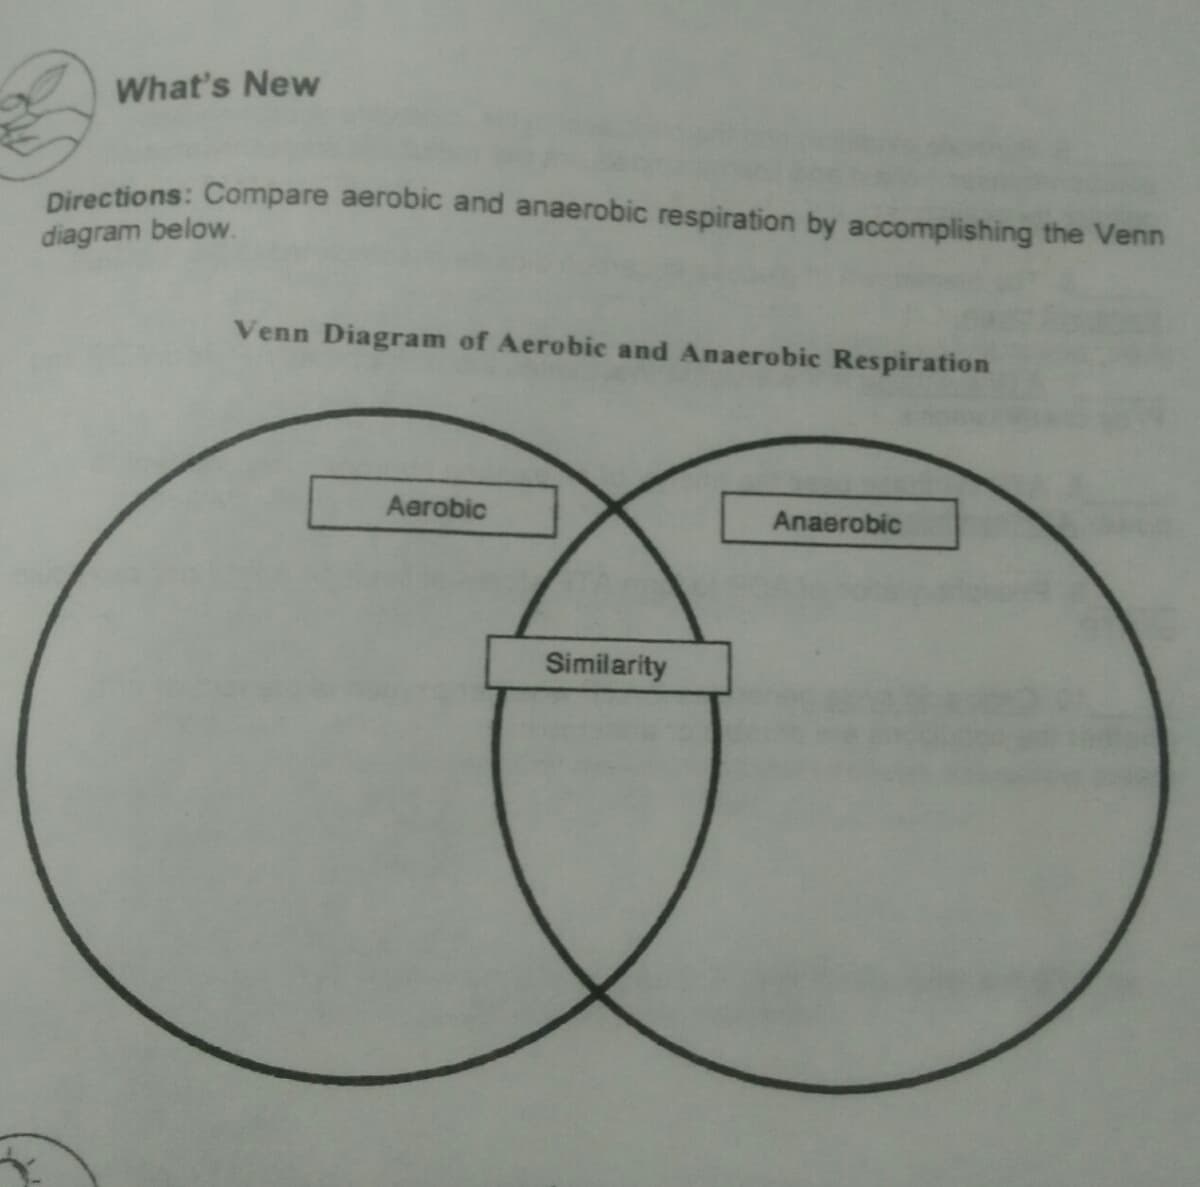 What's New
Directions: Compare aerobic and anaerobic respiration by accomplishing the Venn
diagram below.
Venn Diagram of Aerobic and Anaerobic Respiration
Aerobic
Anaerobic
Similarity
